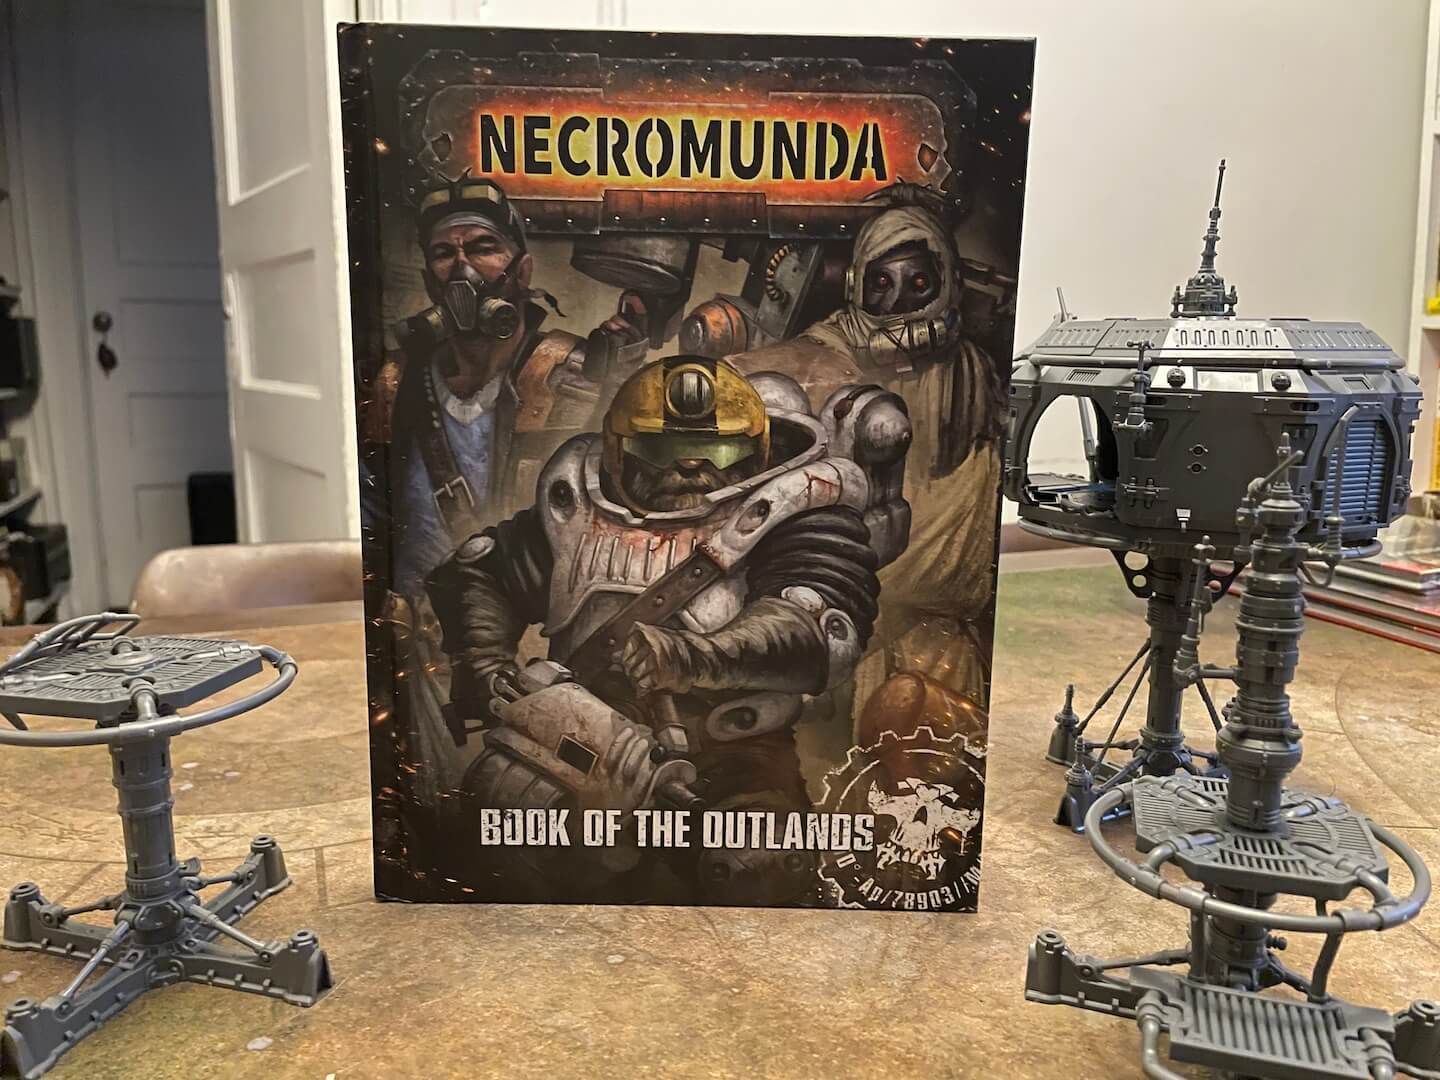 How will you survive the Ash Wastes in Warhammer Necromunda Book of the Outlands?